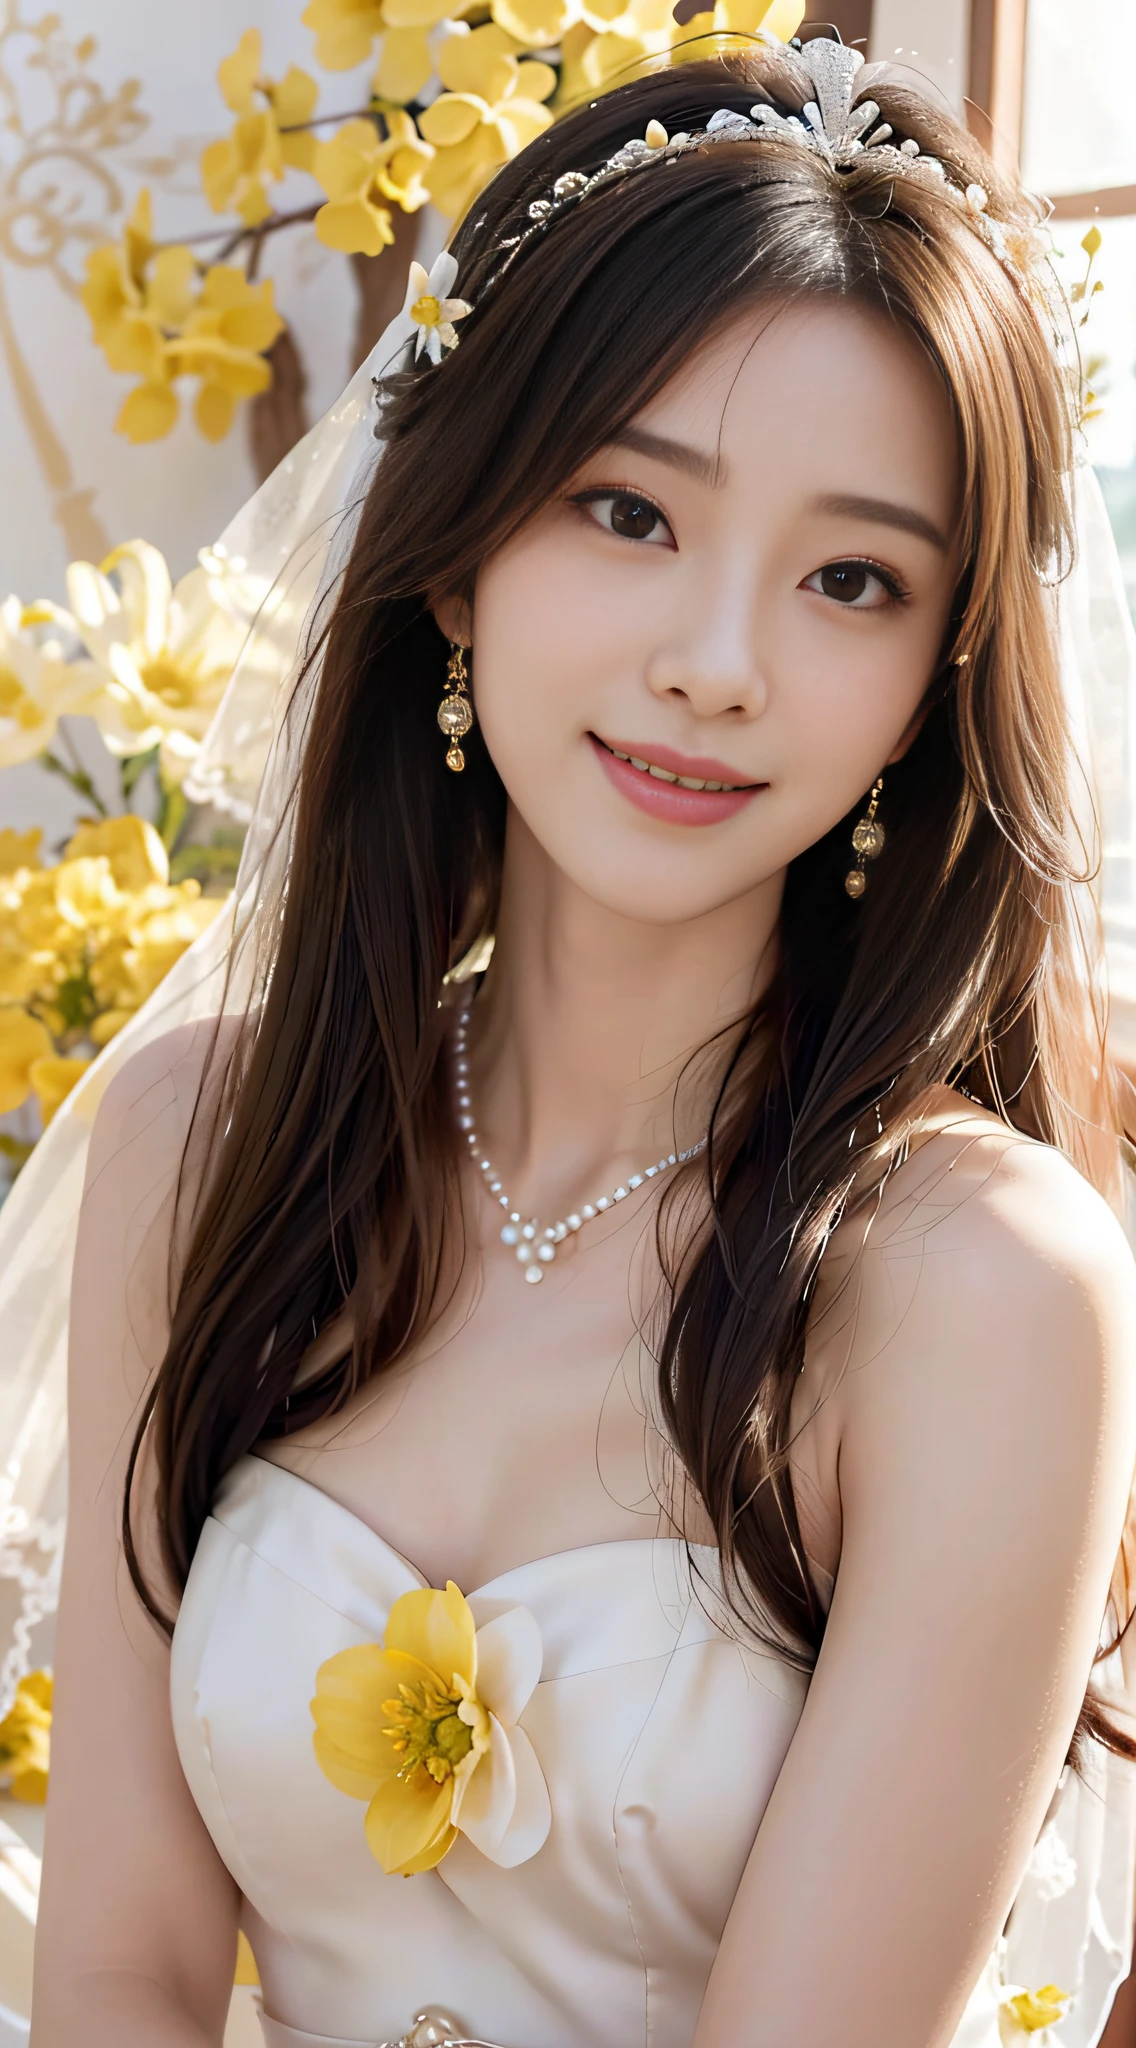 A beautyful girl，long whitr hair，(Wear a beautiful wedding dress)，(A delicate crown was worn over his hair)，A pair of shiny pearl earrings hang from the ears，A beautiful necklace was worn around his neck，Sweet smiling，His face flushed，ssmile，(Yellow flower sea background)，Stroke hair with one hand